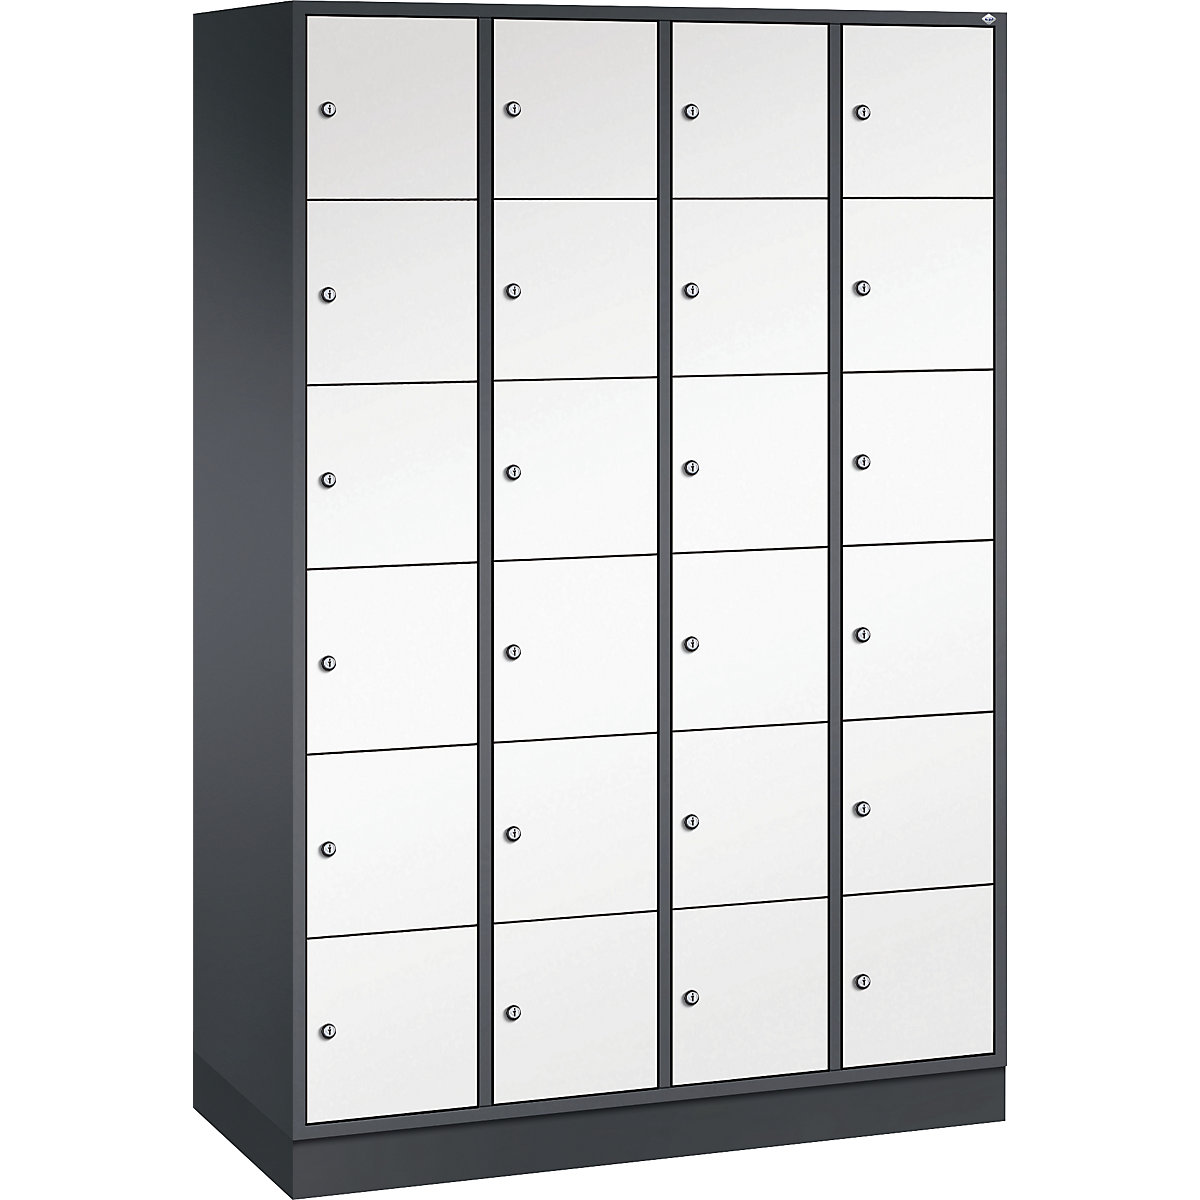 INTRO steel compartment locker, compartment height 285 mm – C+P, WxD 1220 x 500 mm, 24 compartments, black grey body, pure white doors-5